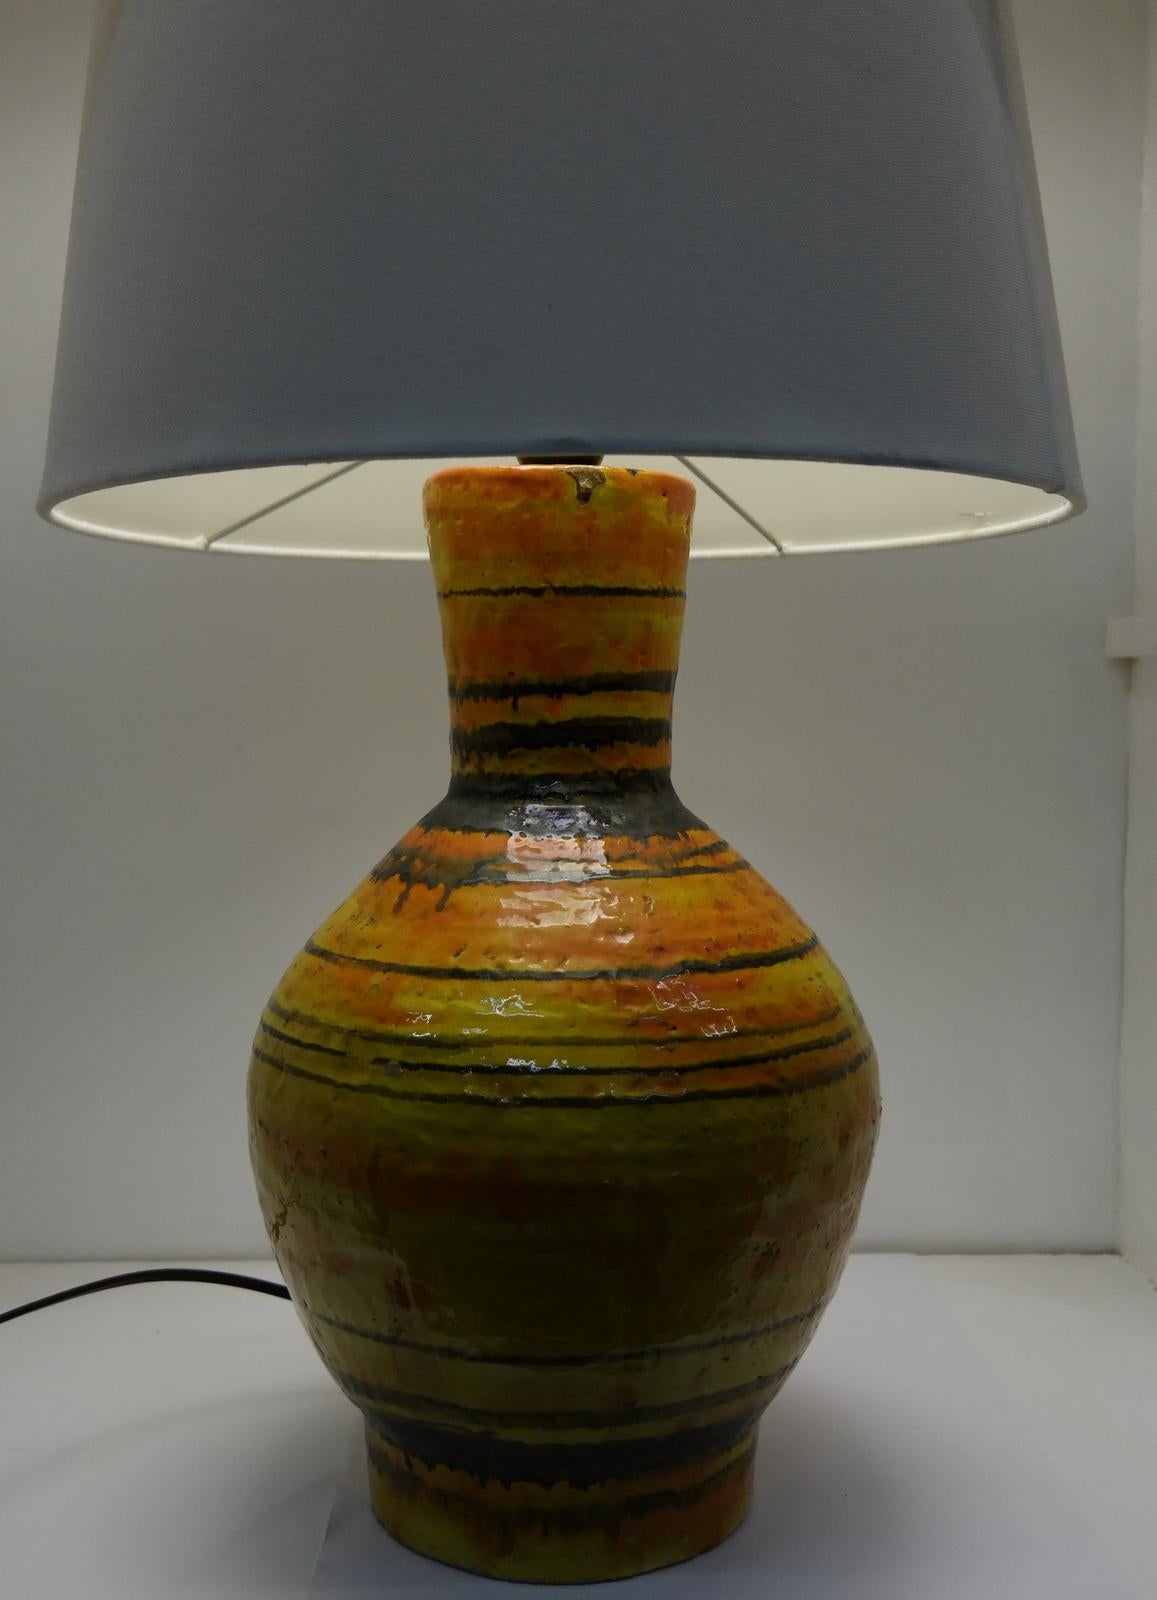 This large signed and handmade ceramic lamp was made in the 1970s. It features a glossy glazed finish and it's an individual, large format piece. Signed on the top: ZSH. From the artists collection.

Born in 1953 in Budapest, G. Zsuzsa Heller